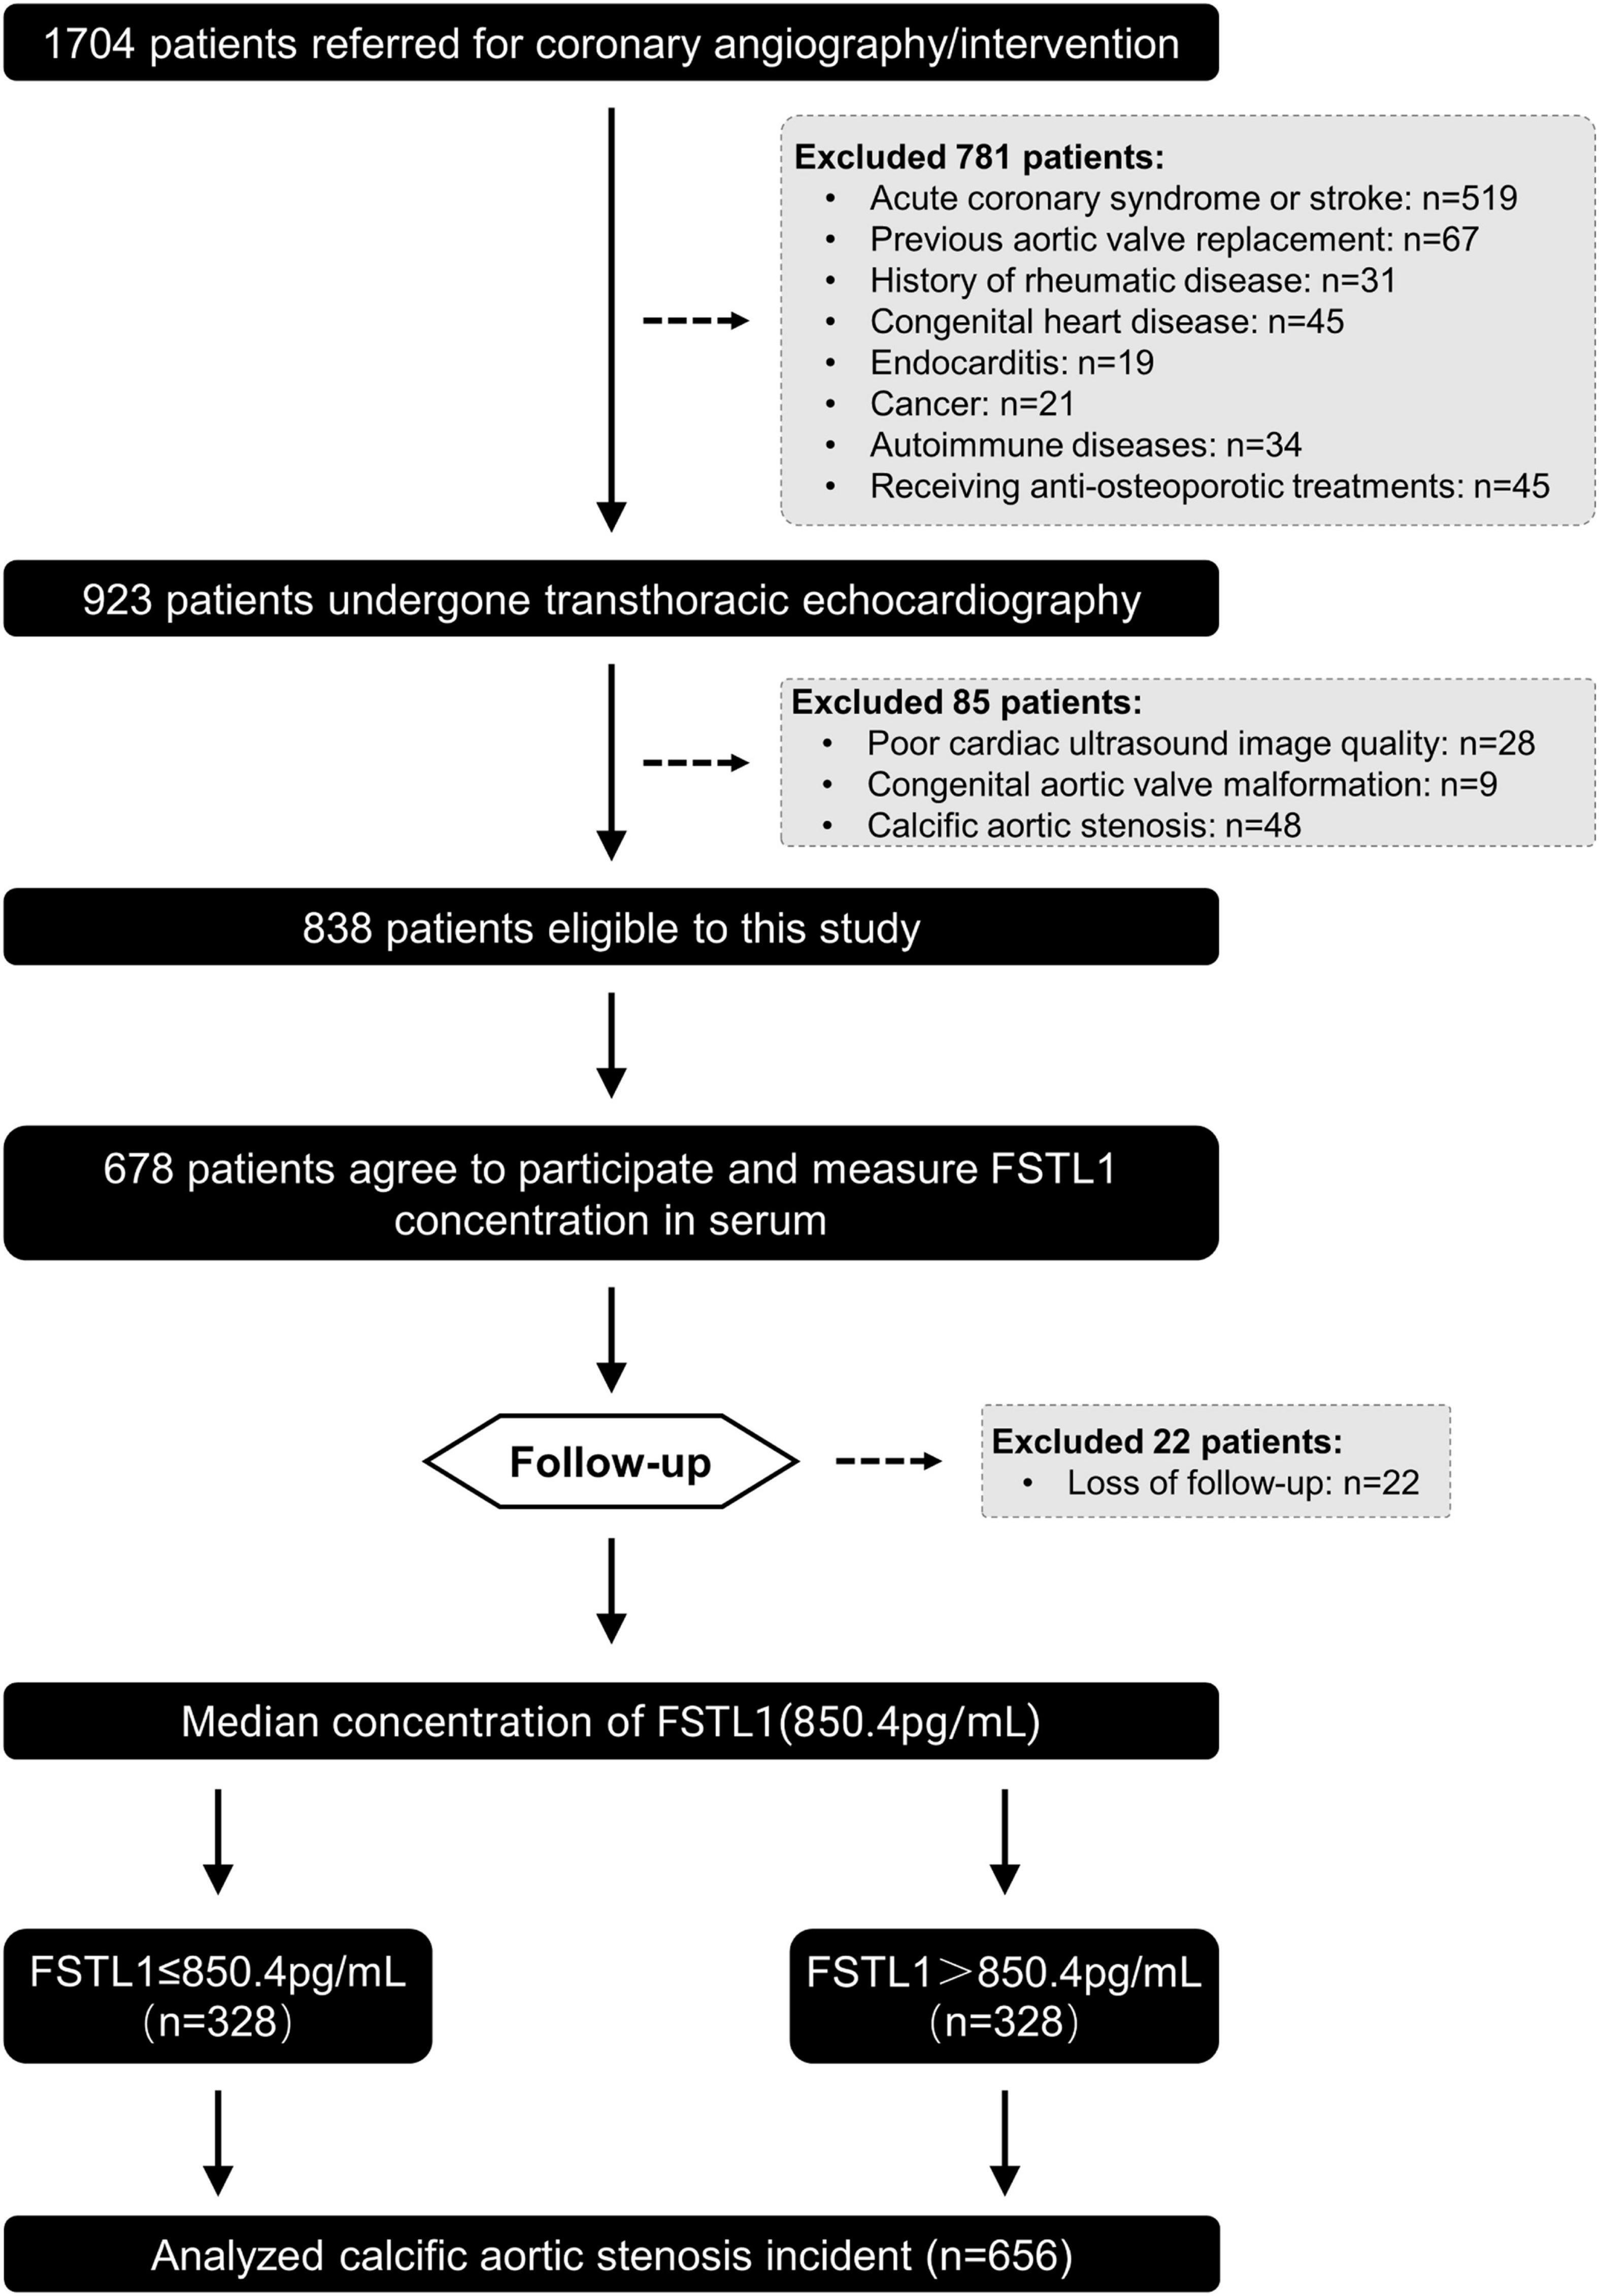 Role of follistatin-like 1 levels and functions in calcific aortic stenosis